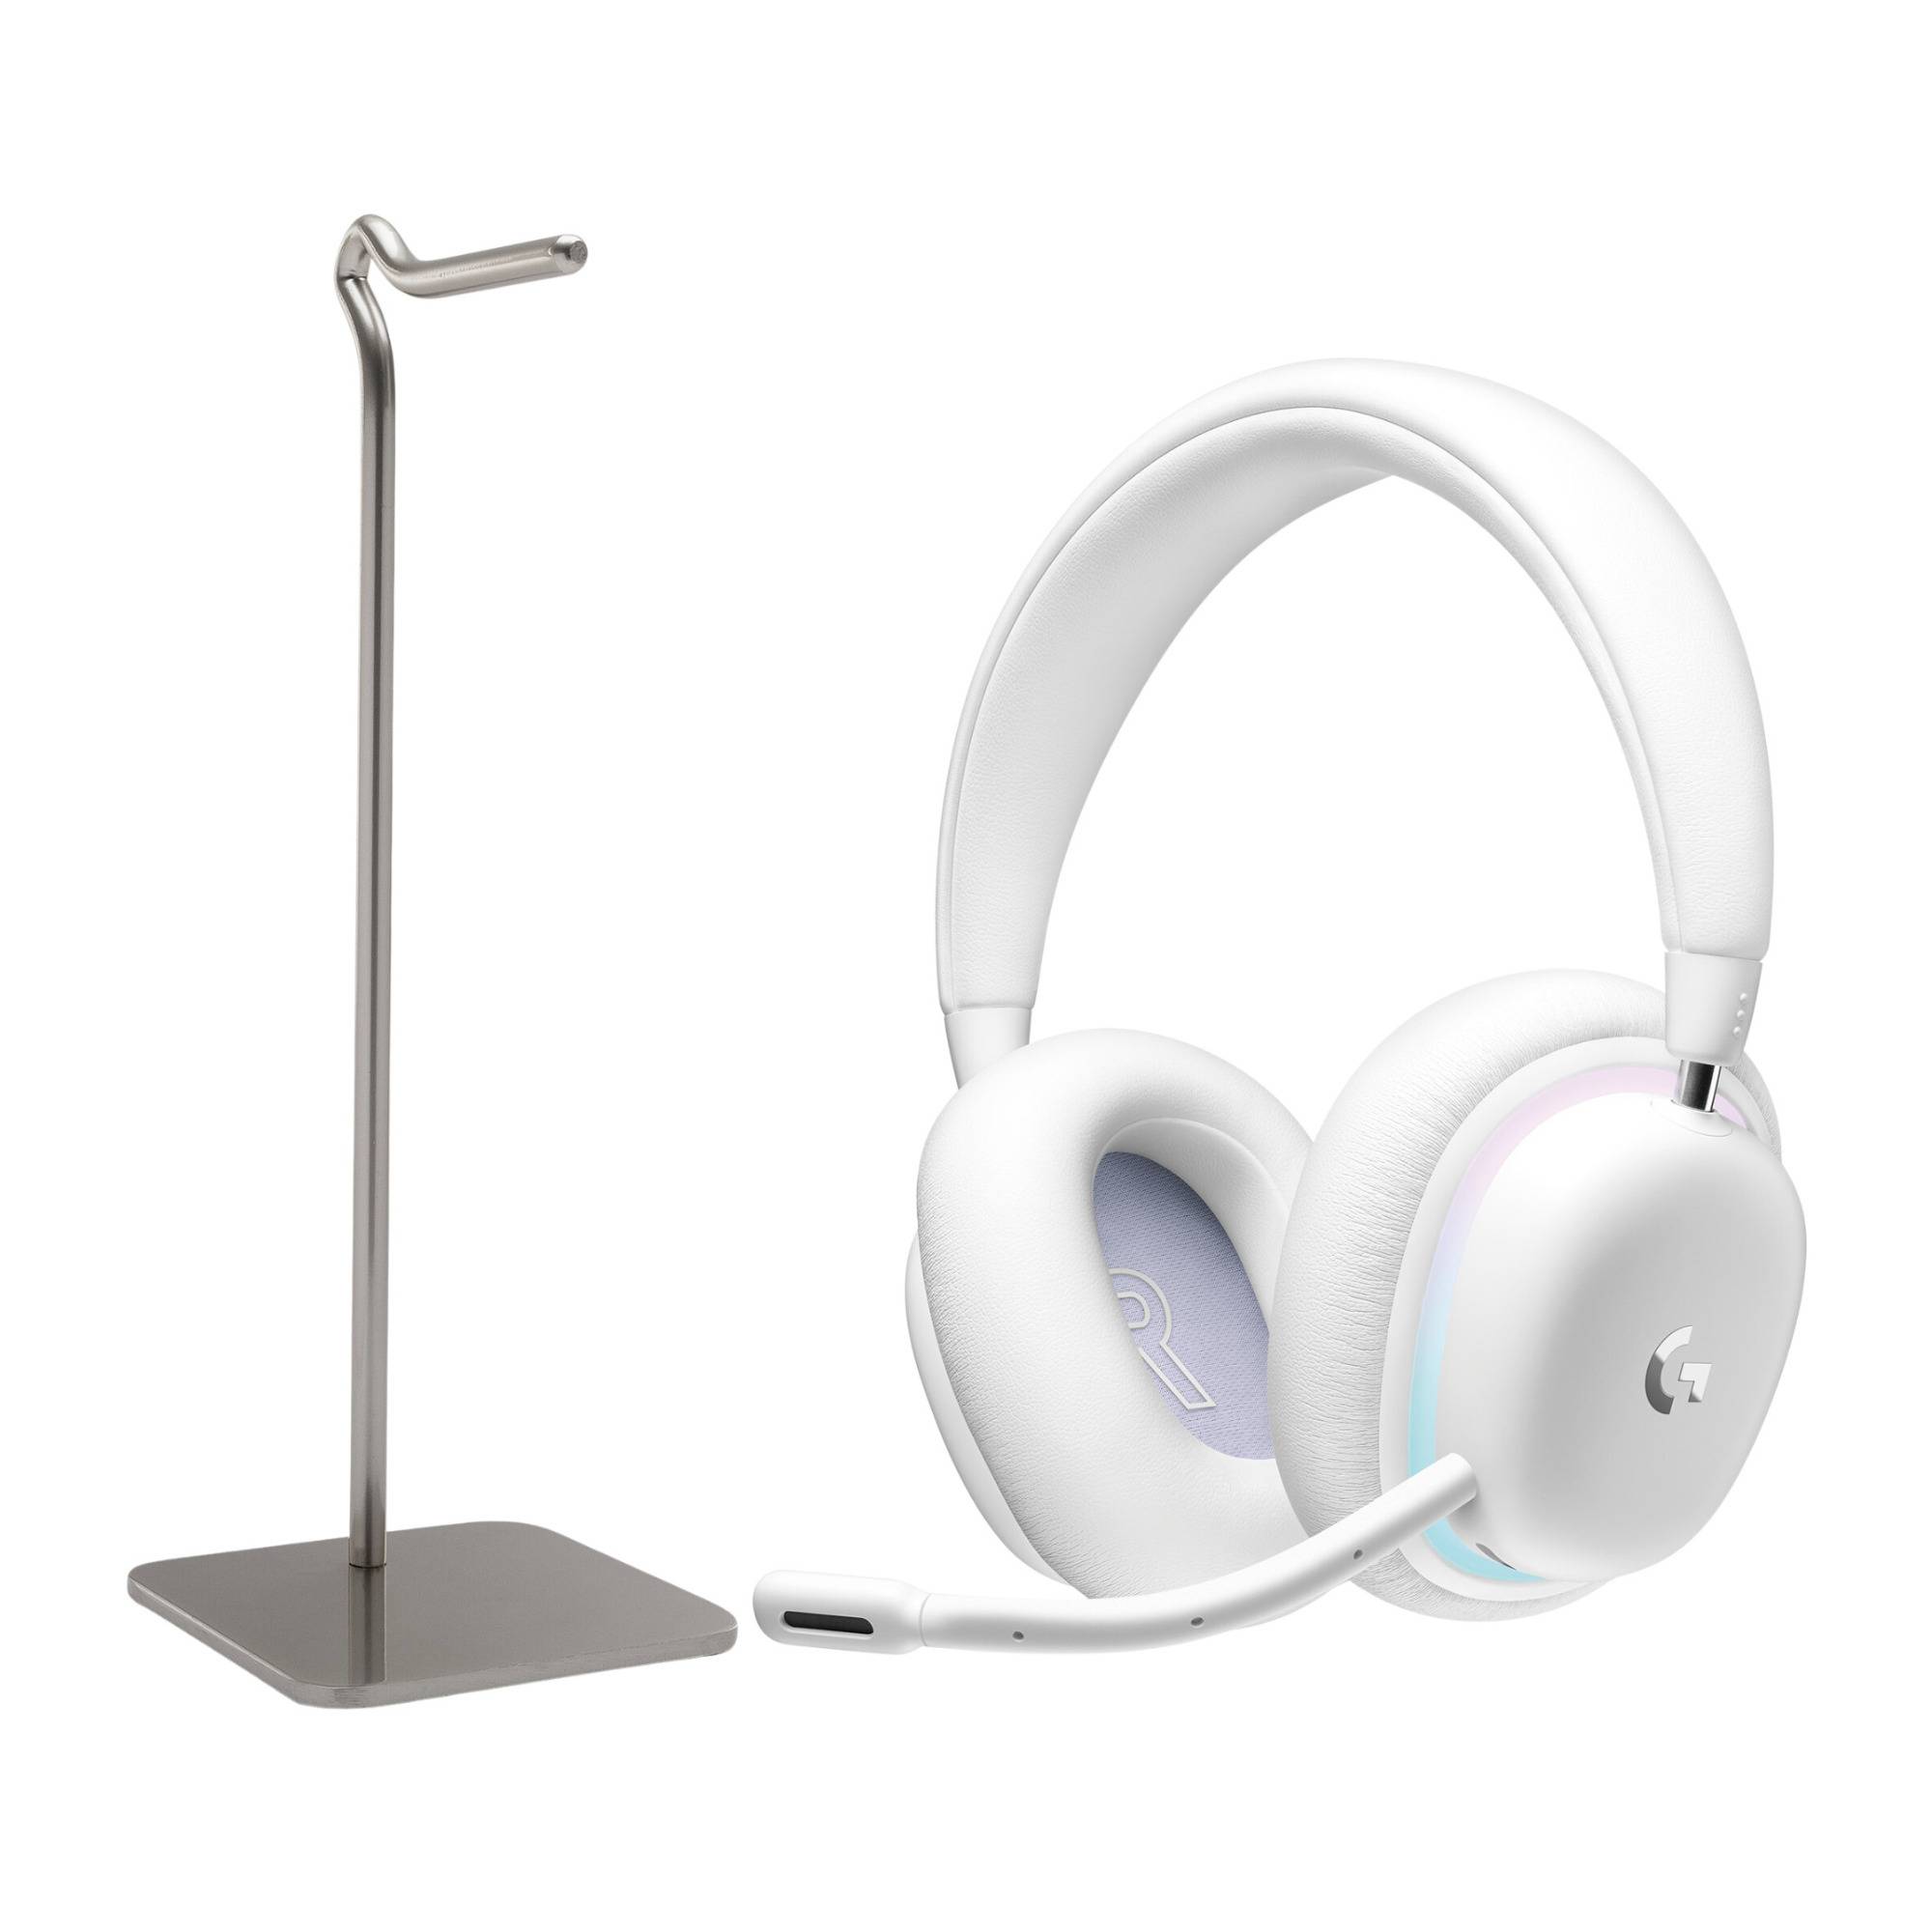 Logitech G735 Wireless Gaming Bluetooth Headset (White) with Headphone Stand